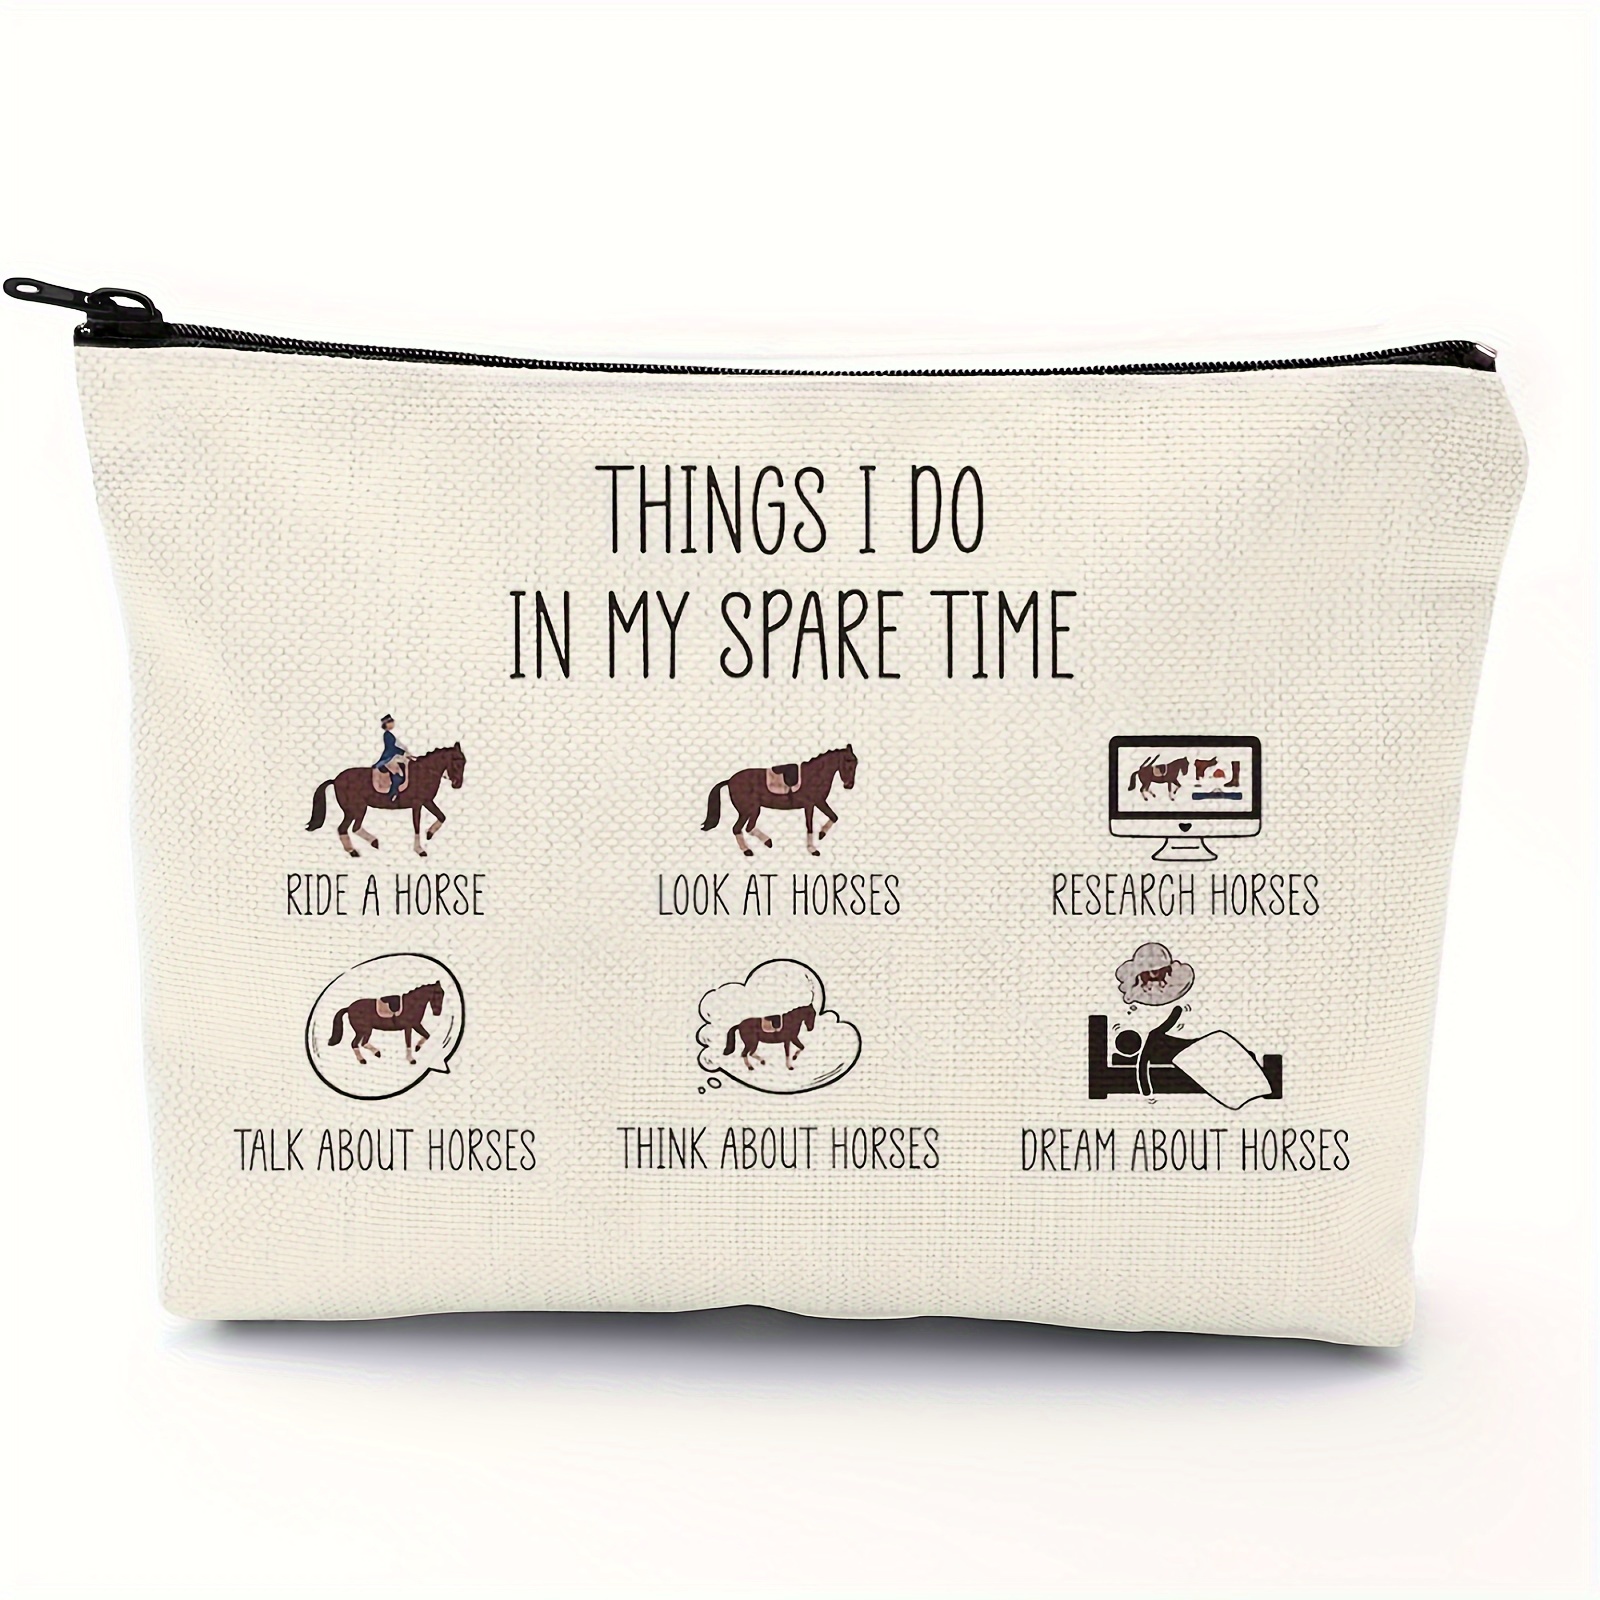 

Horse Gifts For Women For Horse Lovers Equestrian Horse Makeup Bag Large Capacity Zipper Bag - Things I Do In My Spare Time - Mother's Day Cosmetic Bag